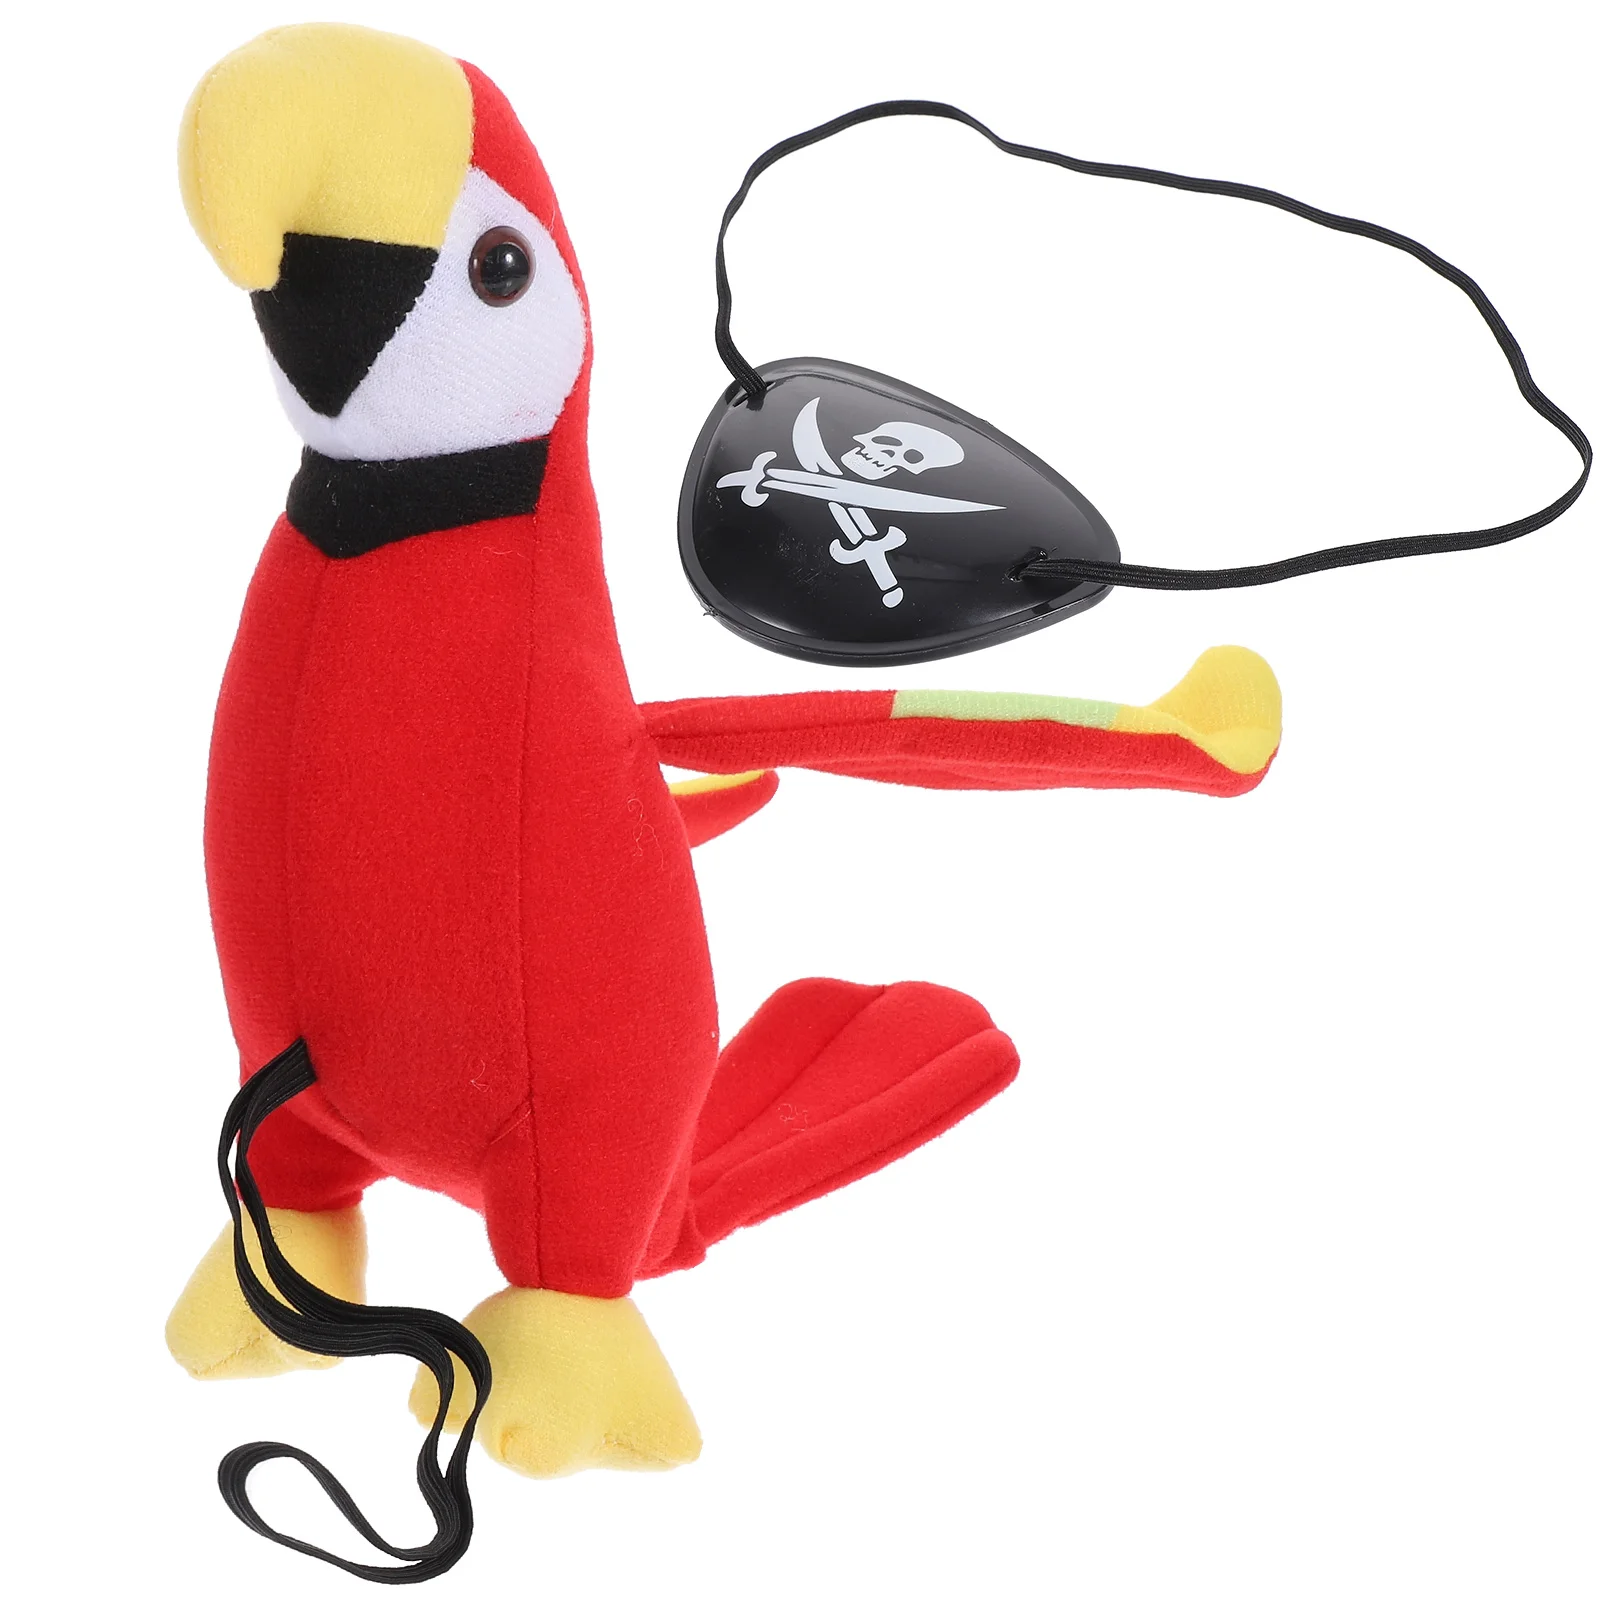 

Plush Standing Shoulder Pirate Parrot Halloween Party Pirate Role-Playing Props (Hanging Shoulder Parrot + Eye Patch C)